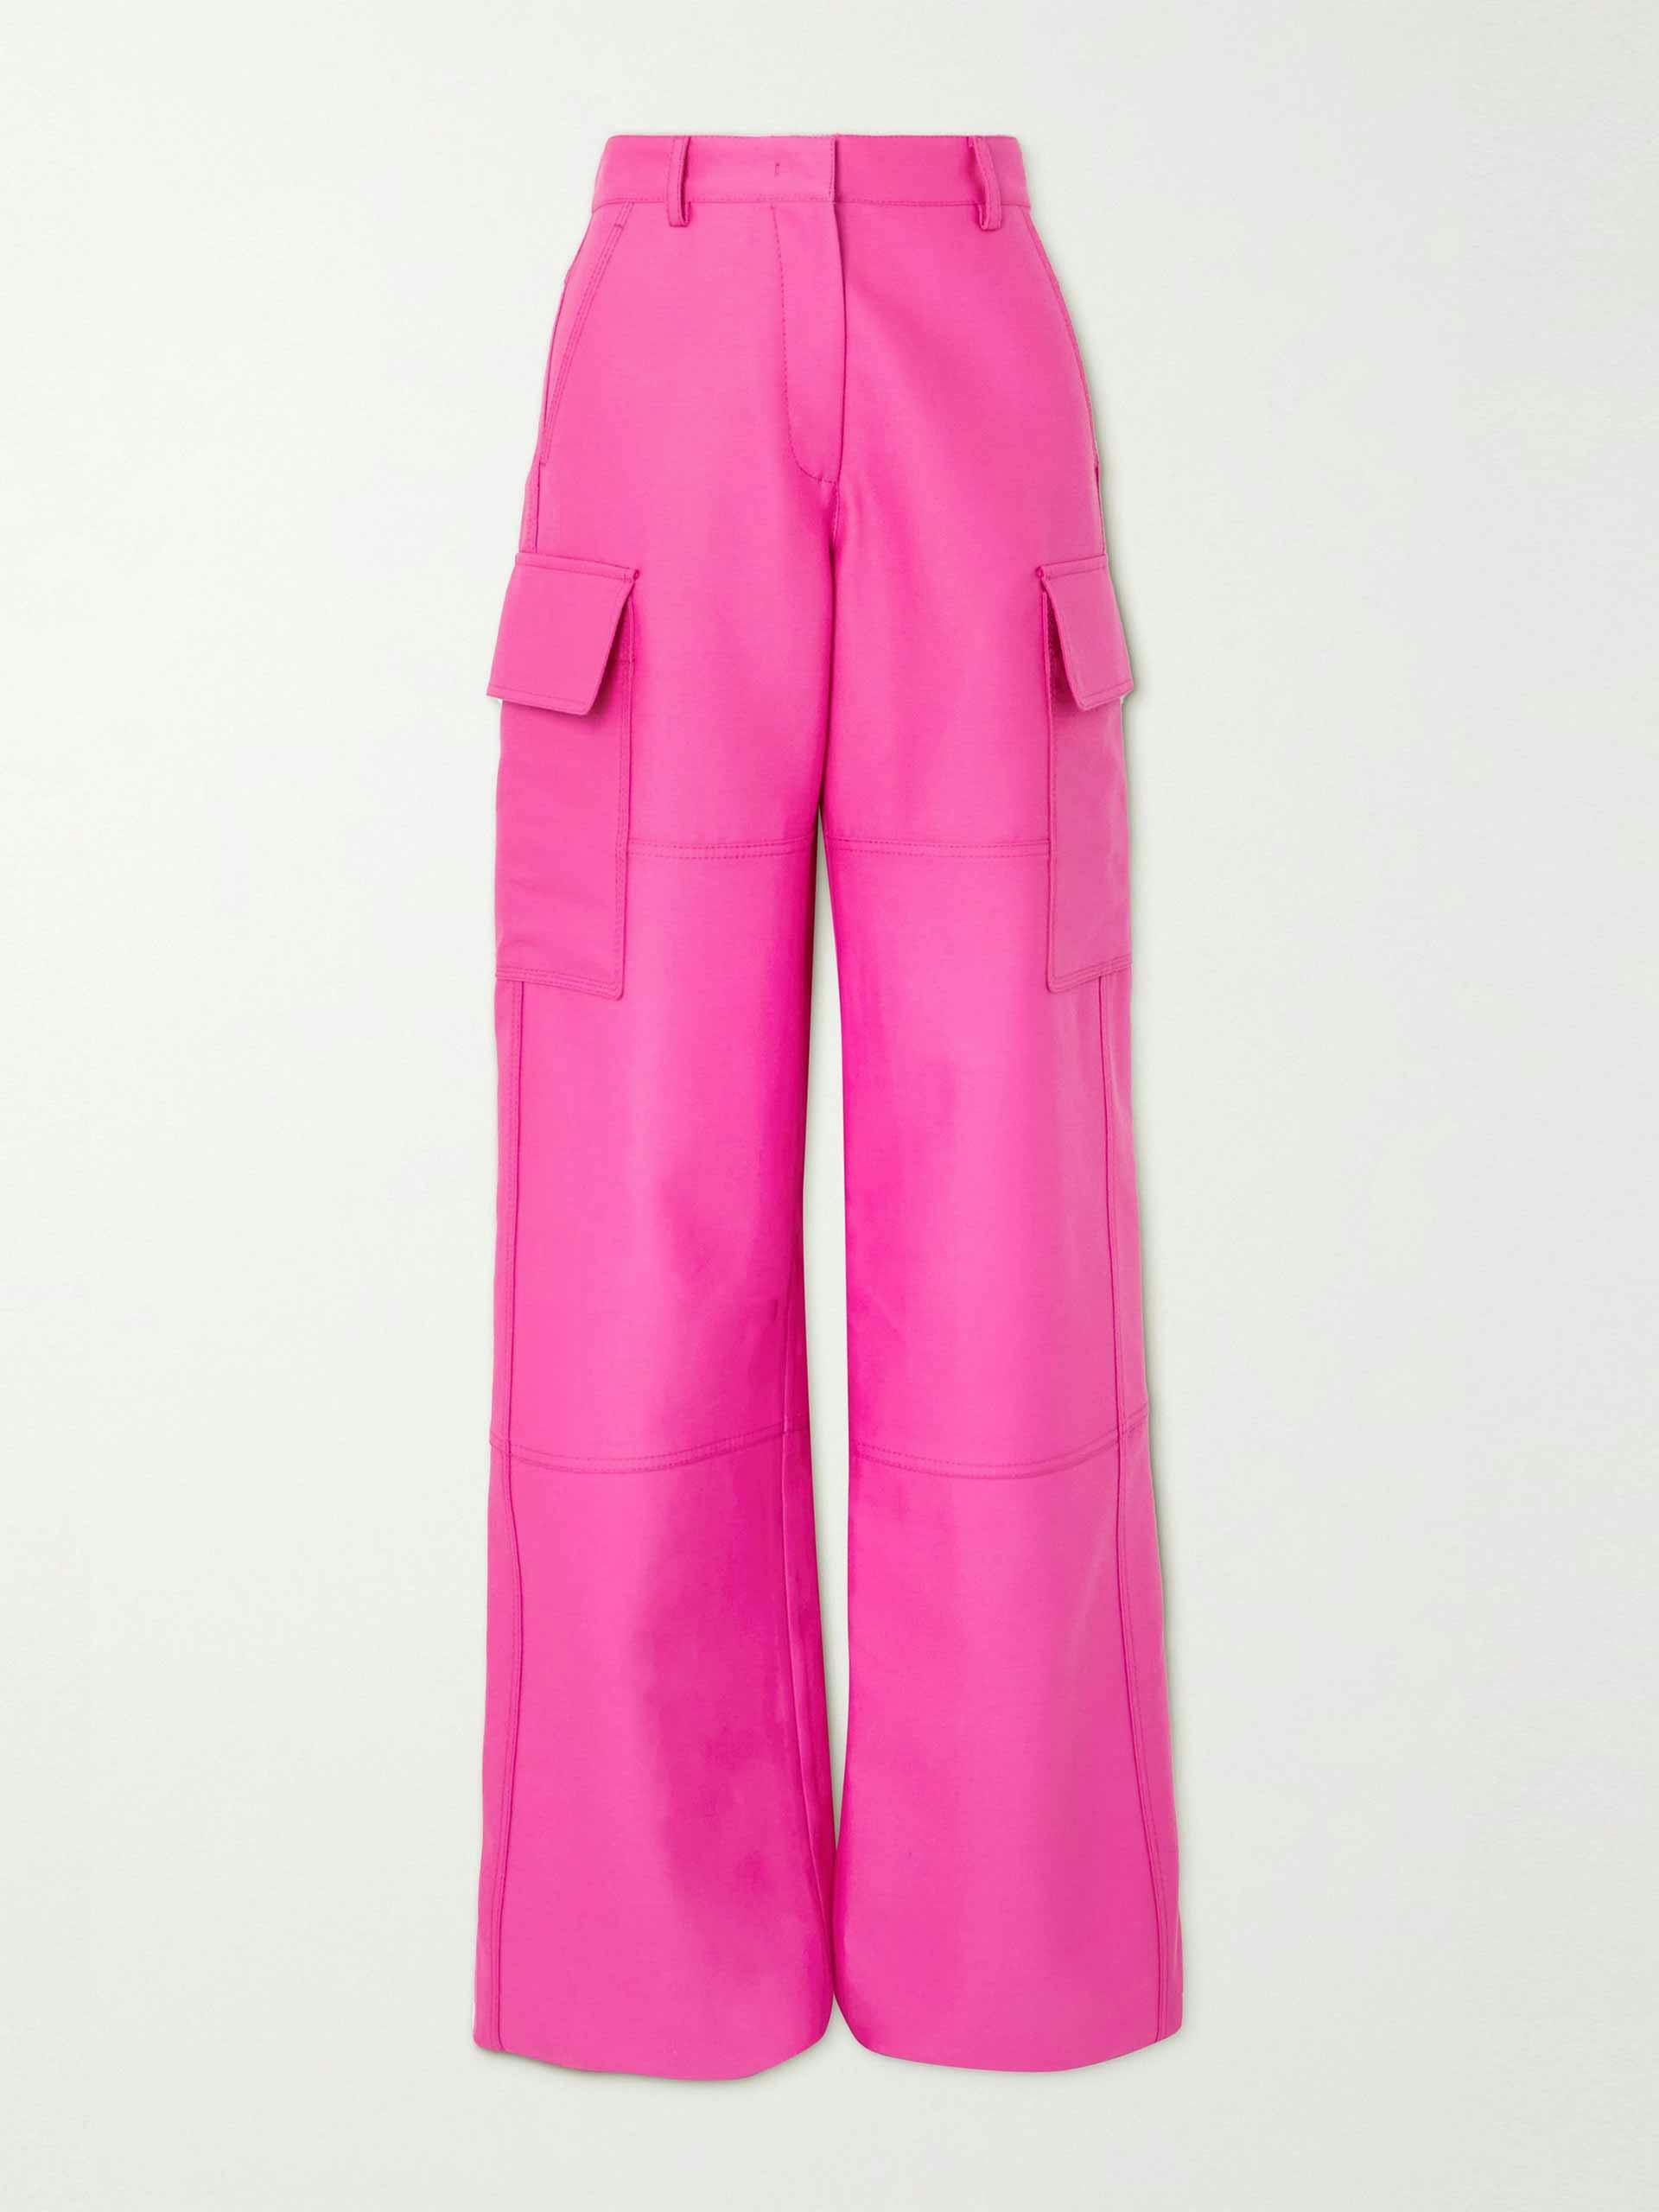 Pink trousers